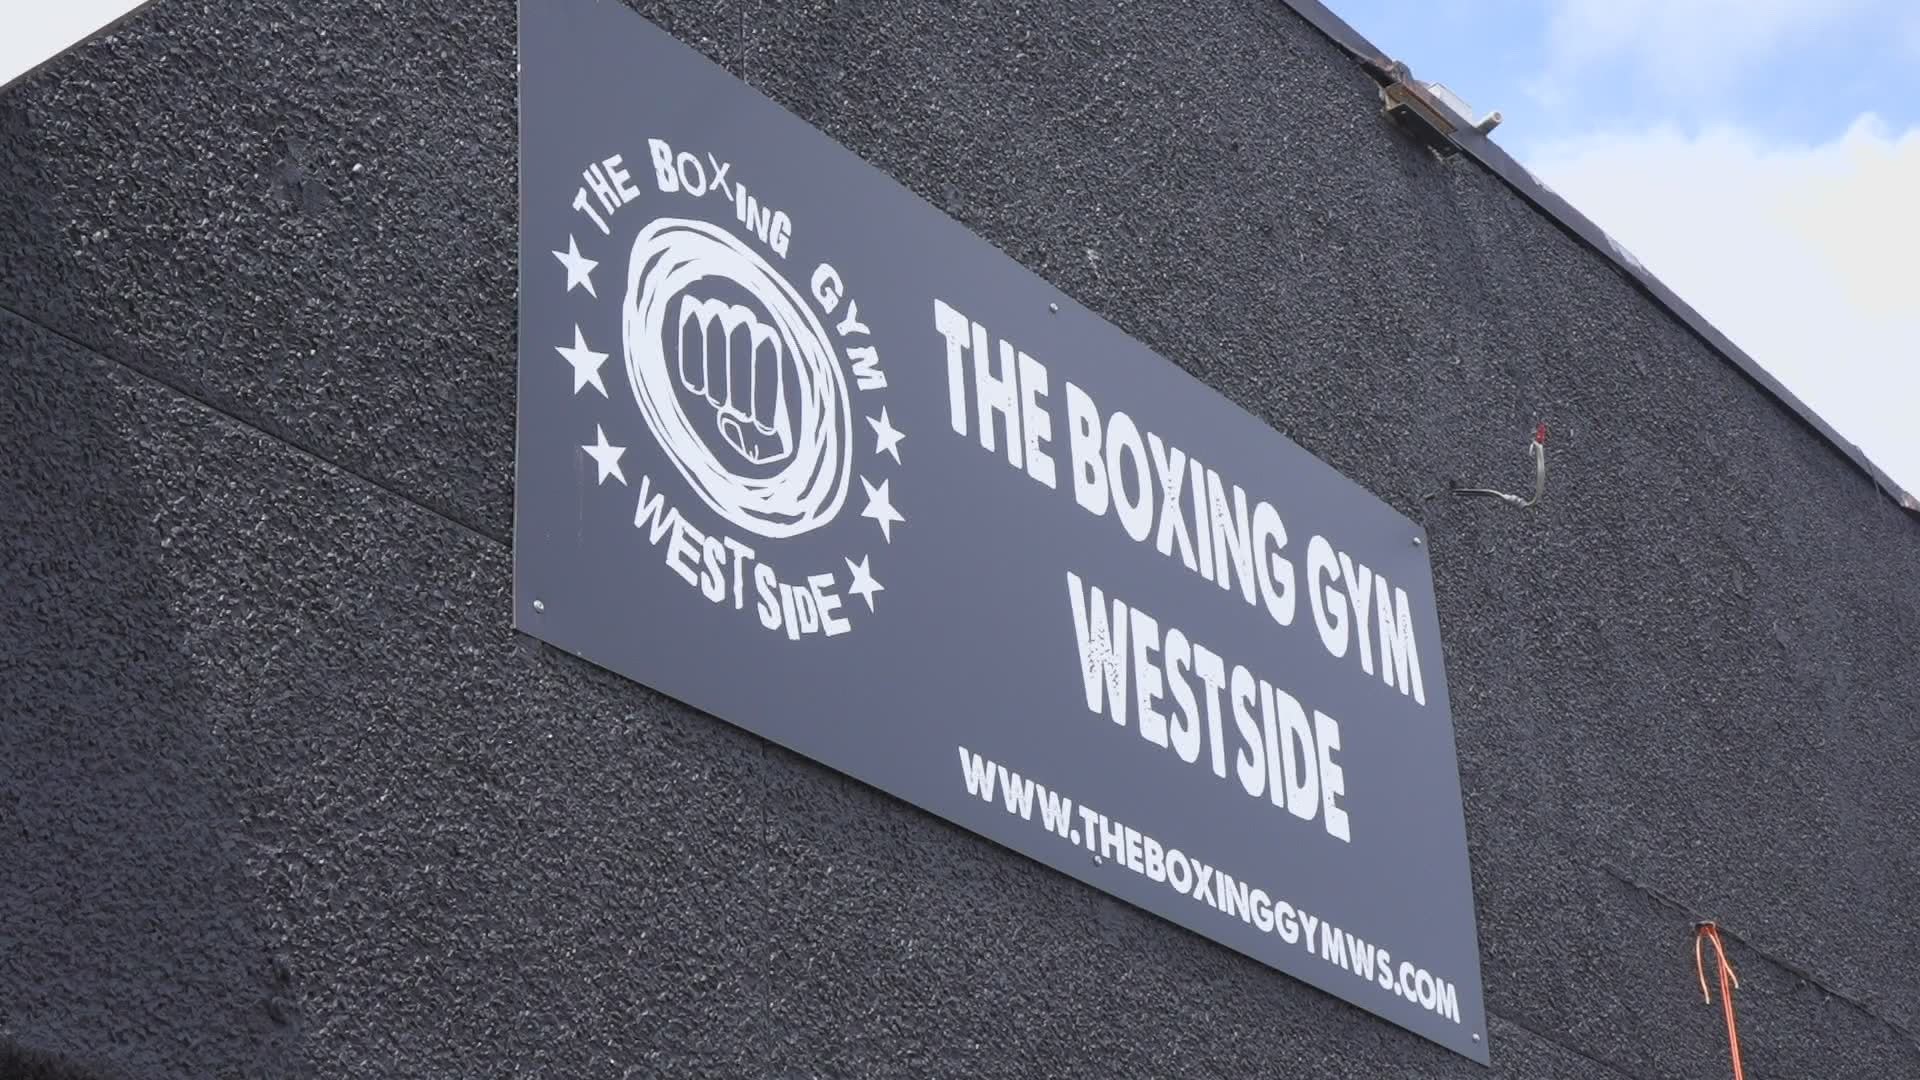 Owner of The Boxing Gym Westside Lee Torres said he's determined to rebuild his business in White Center. A GoFundMe set up on his behalf has raised $36,000.